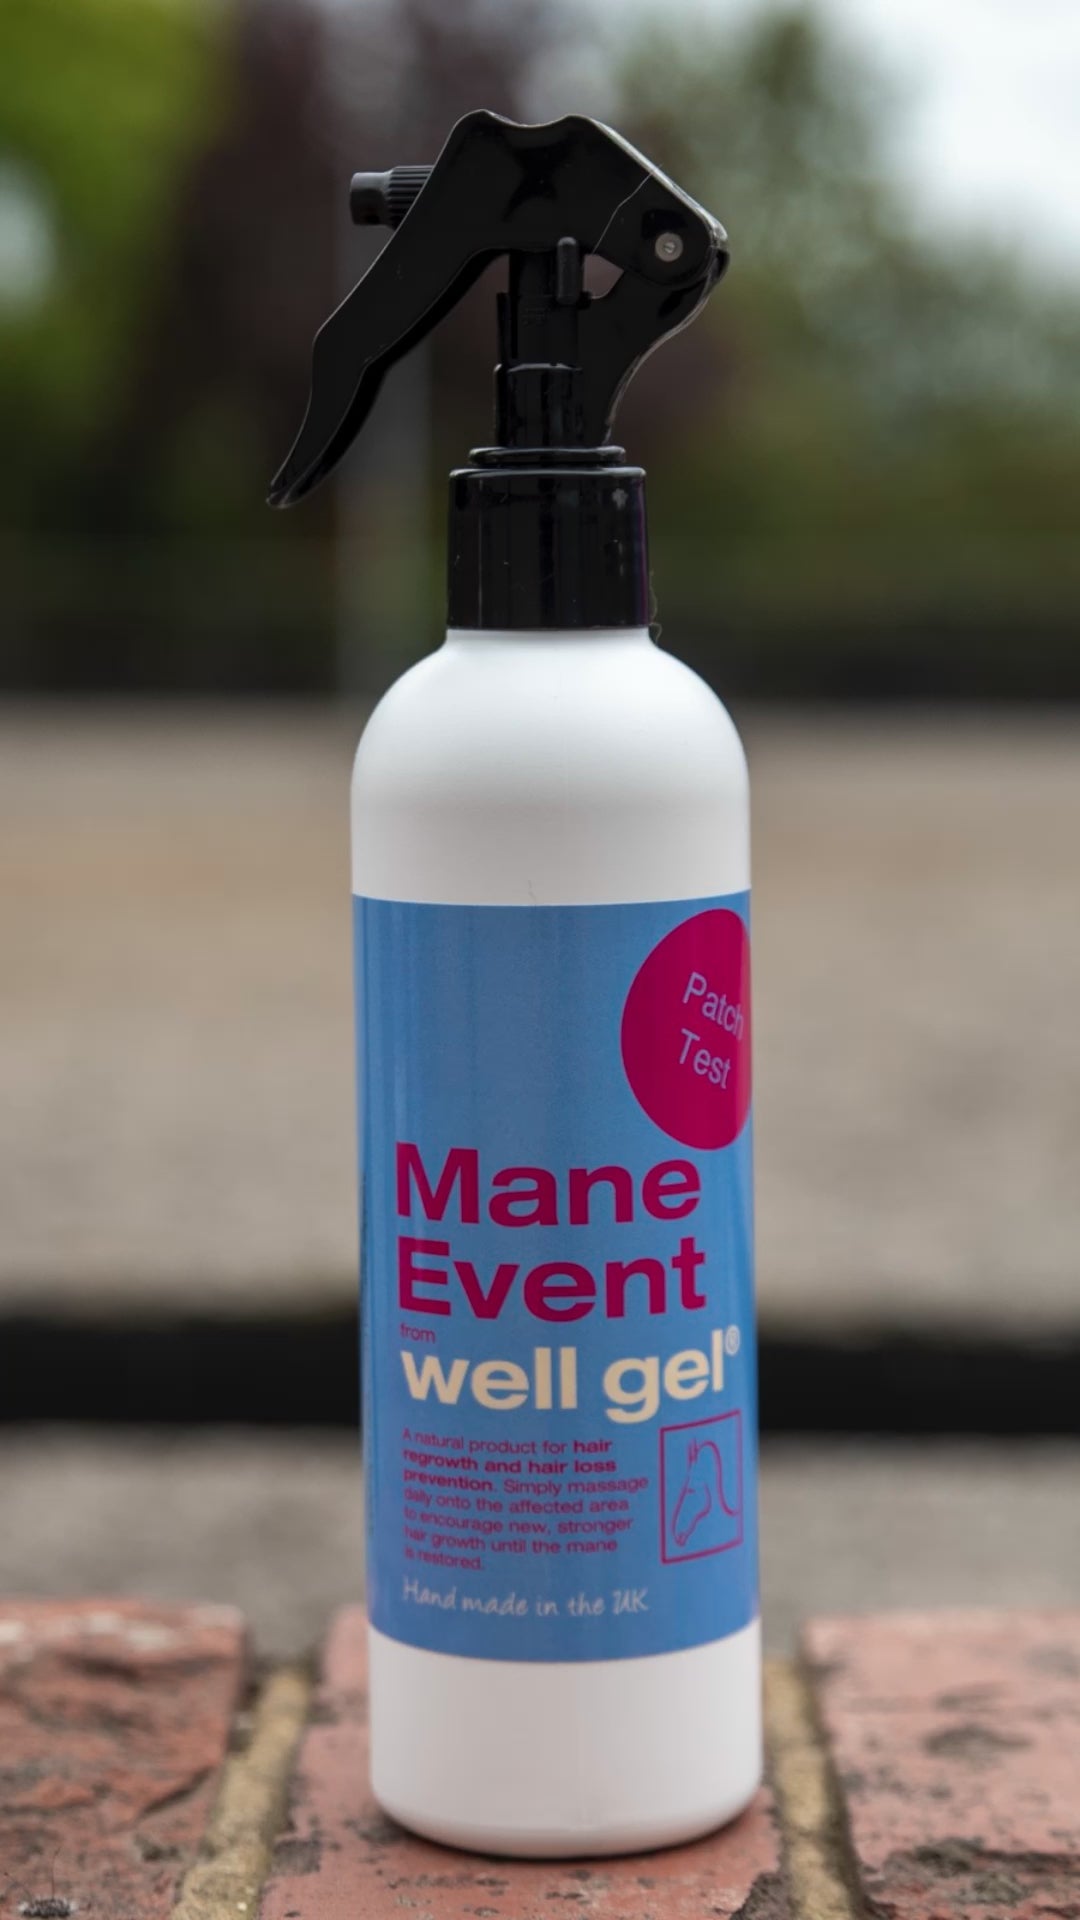 Mane Event aids healthy, conditioned growth